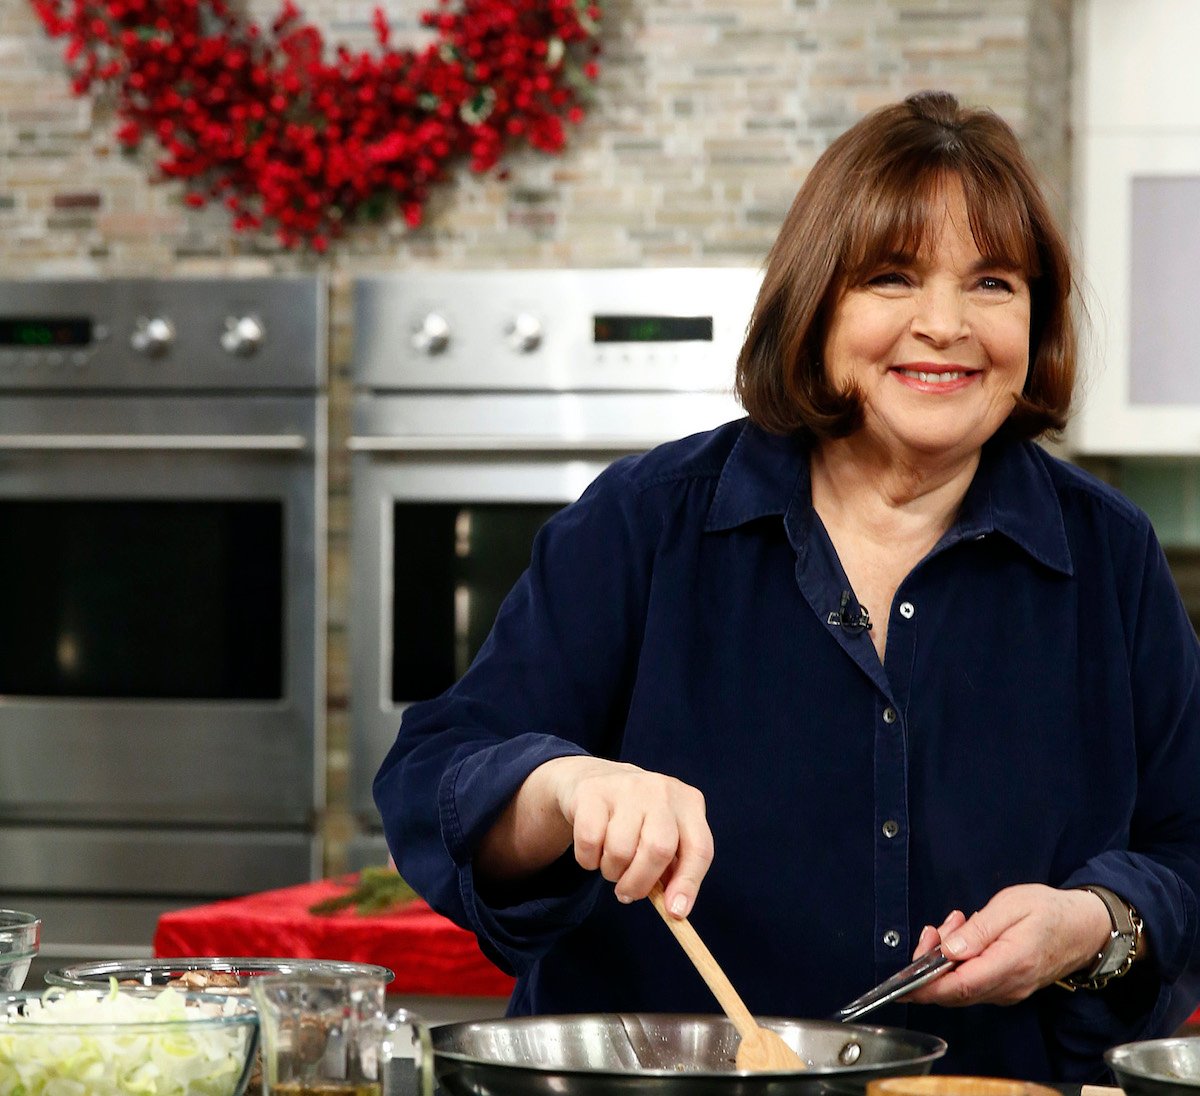 Barefoot Contessa Ina Gartens Outrageous Garlic Bread Includes Some Unexpected Zest